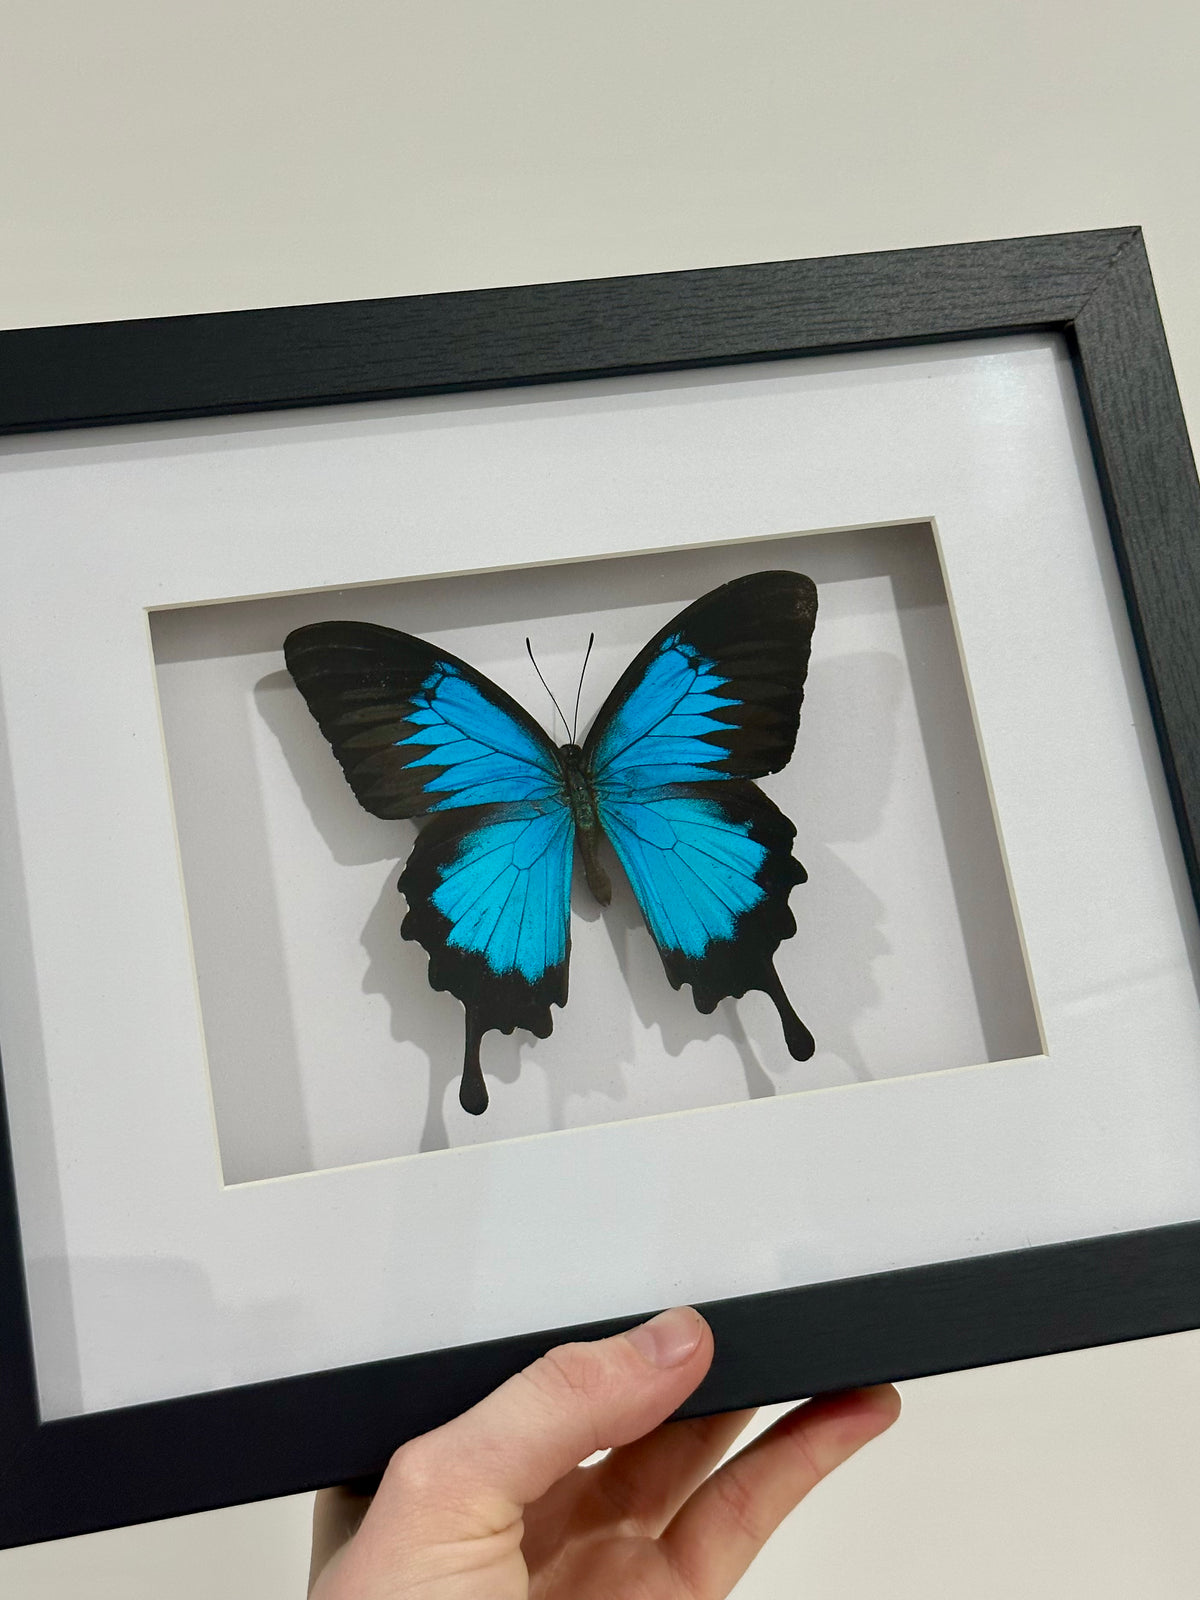 Papilio Ulysses / Blue Emperor Swallowtail Butterfly in a larger frame